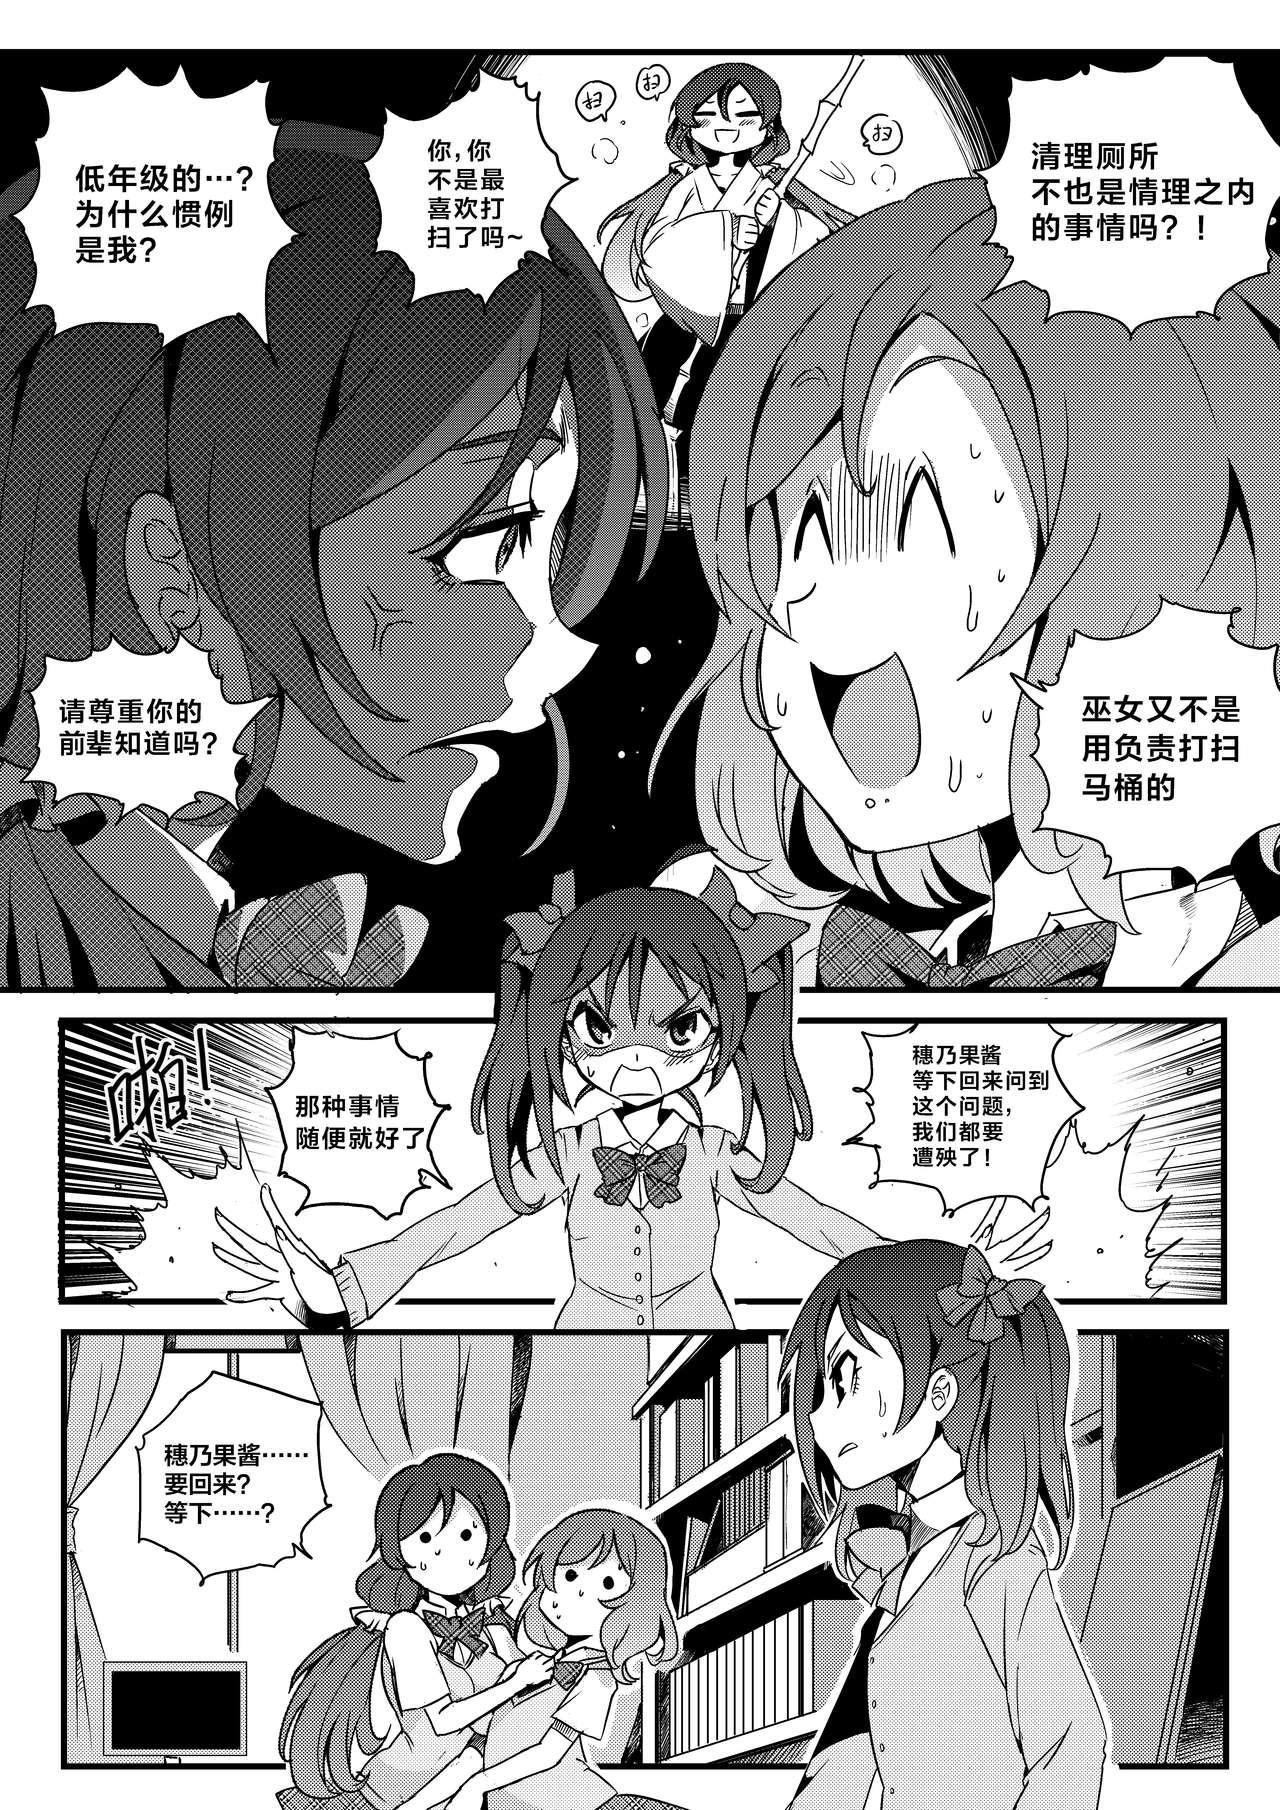 Xxx 果胆卯威 - Kantai collection The idolmaster Love live Hardcore Free Porn - Page 4